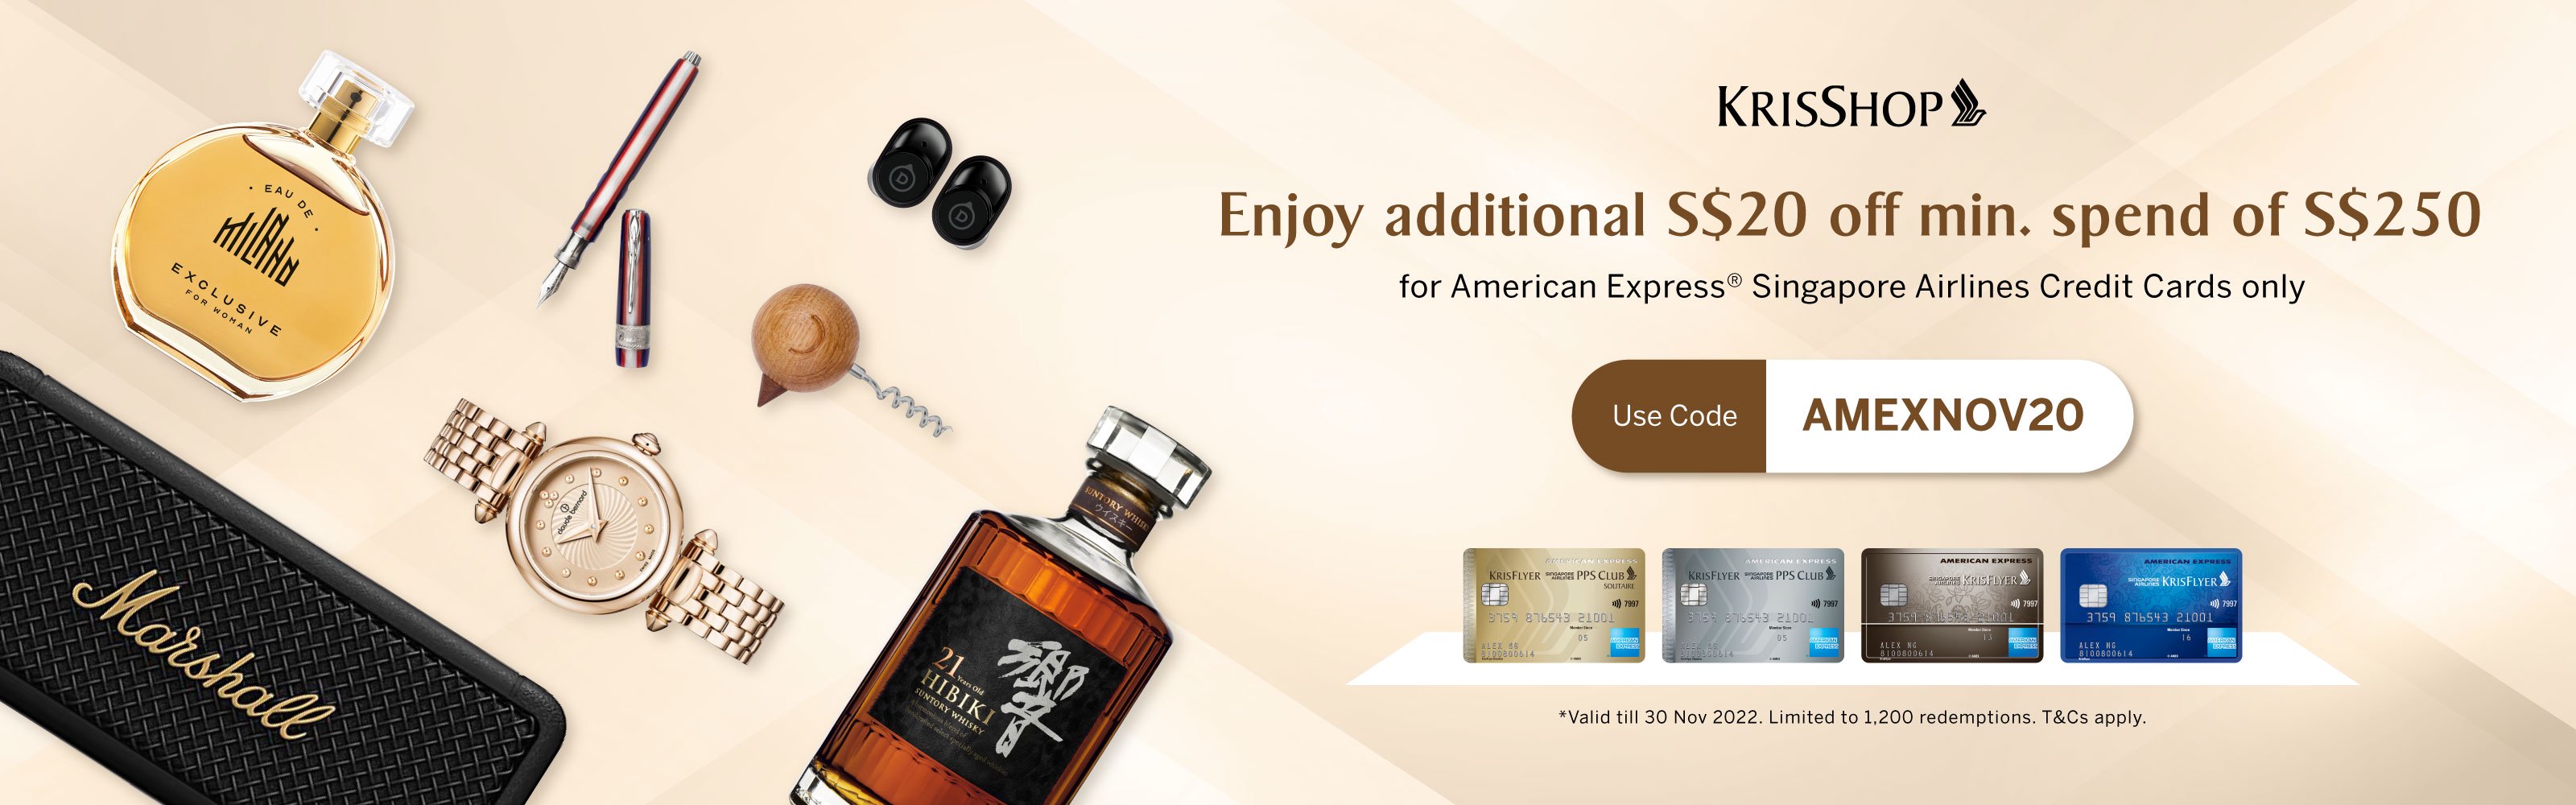 AMEX Exclusive Offer - Enjoy additional S$20 off with min. spend S$250